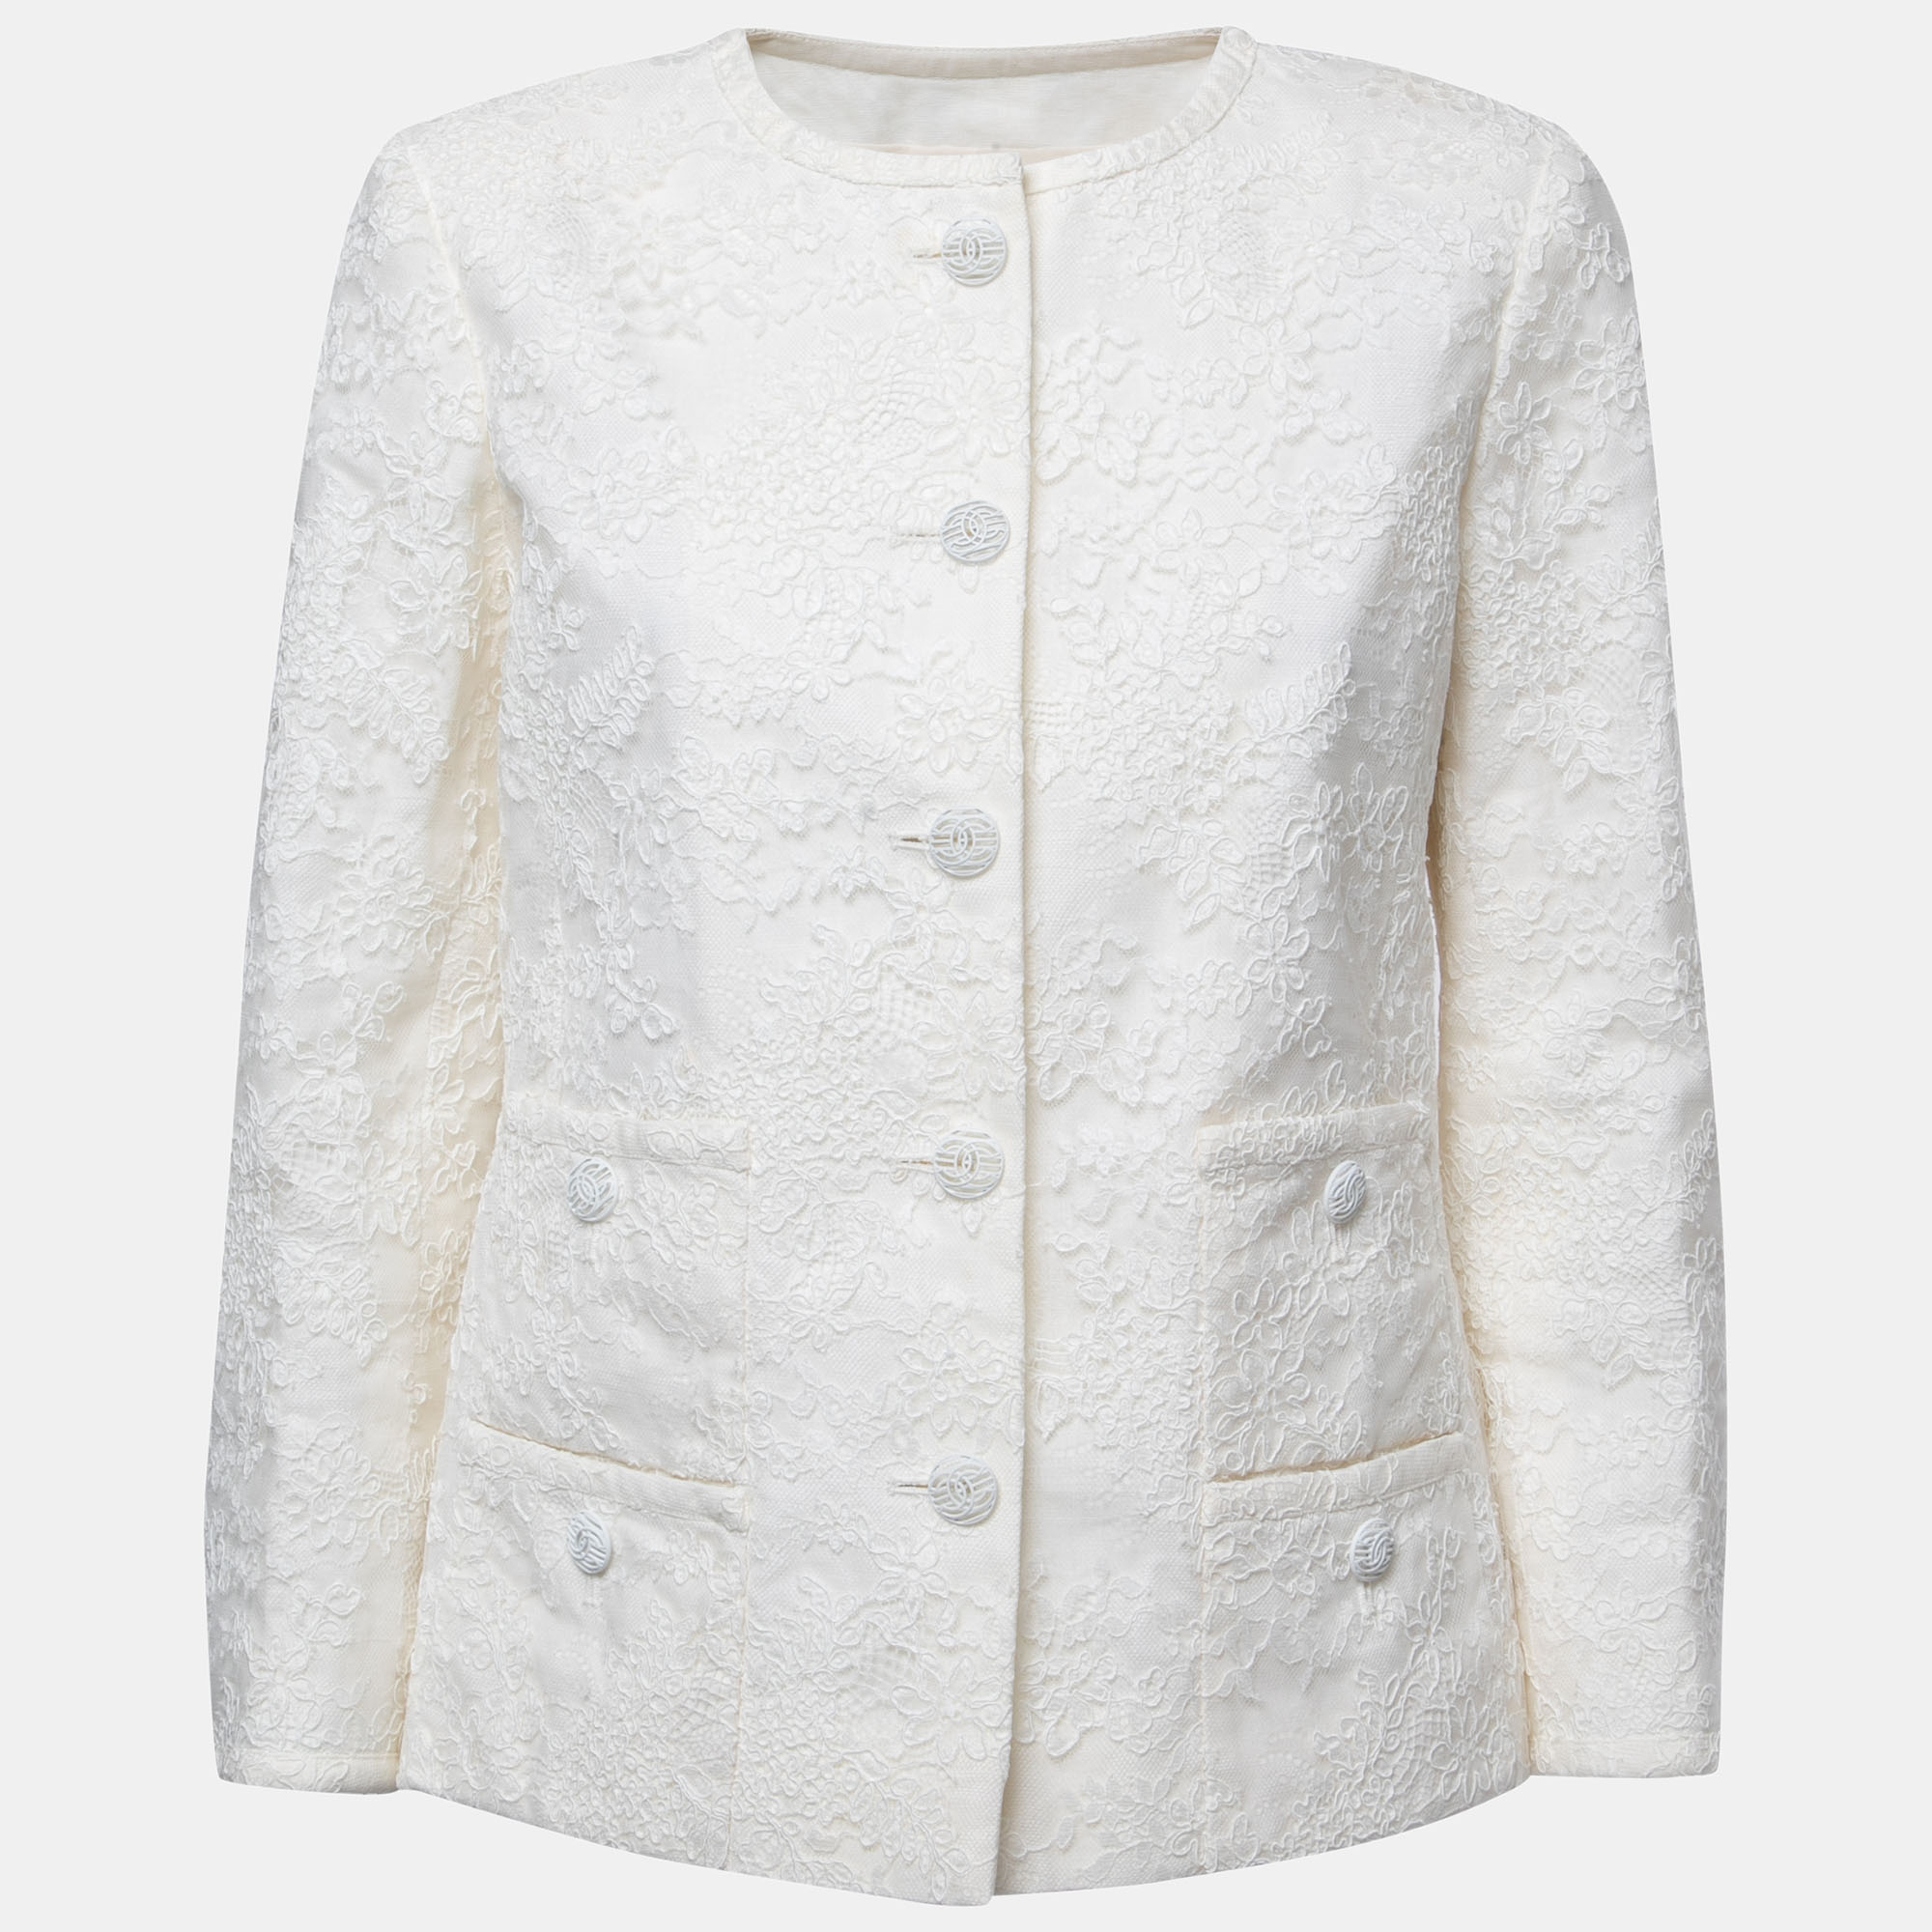 Chanel White Floral Lace Buttoned Jacket M